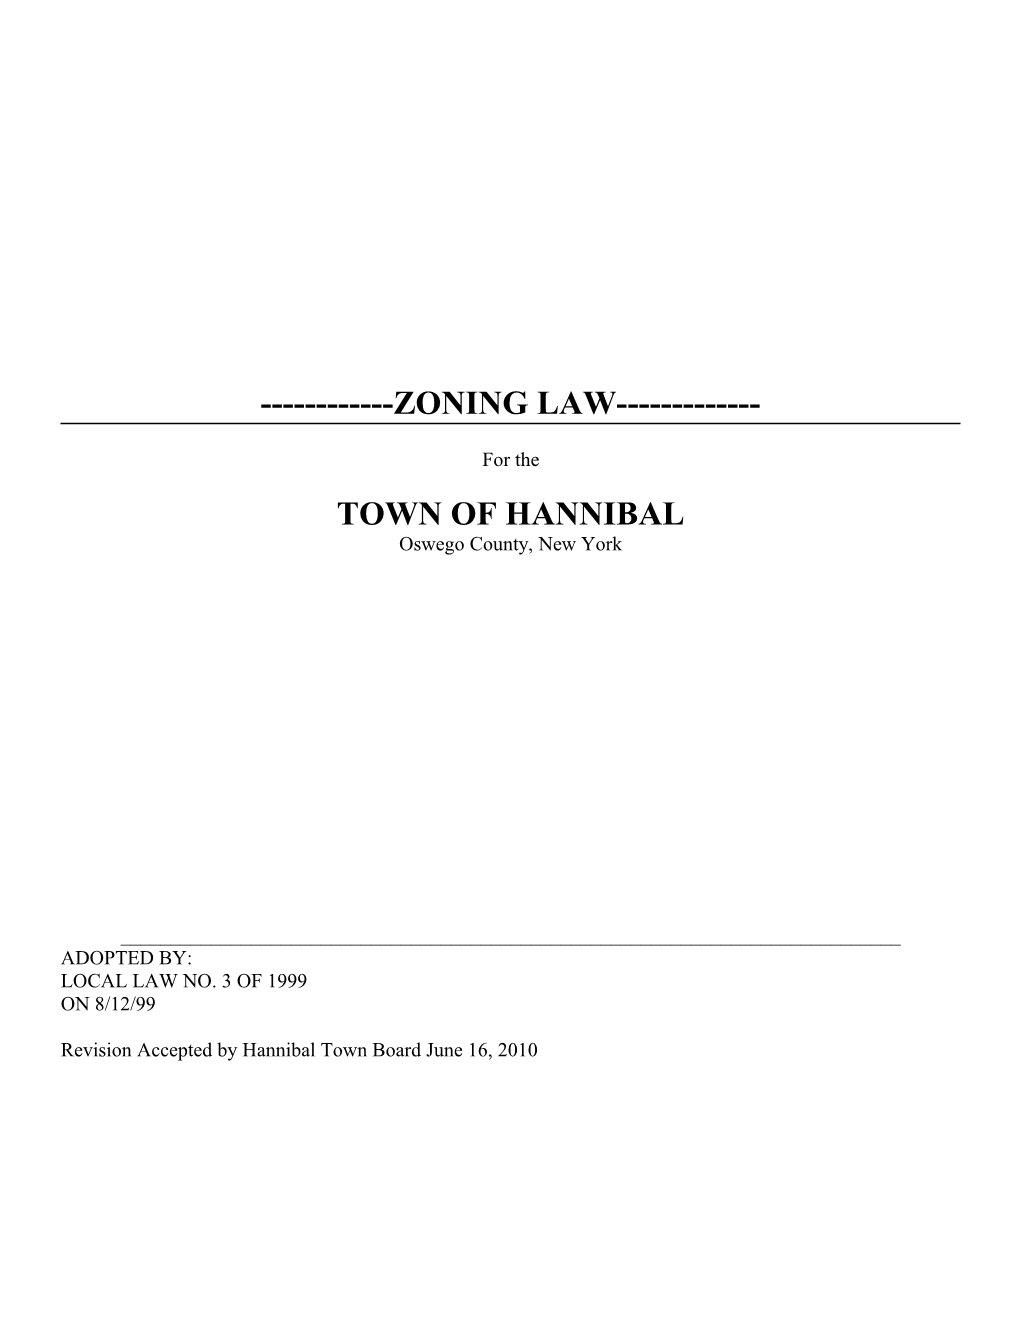 Town of Hannibal